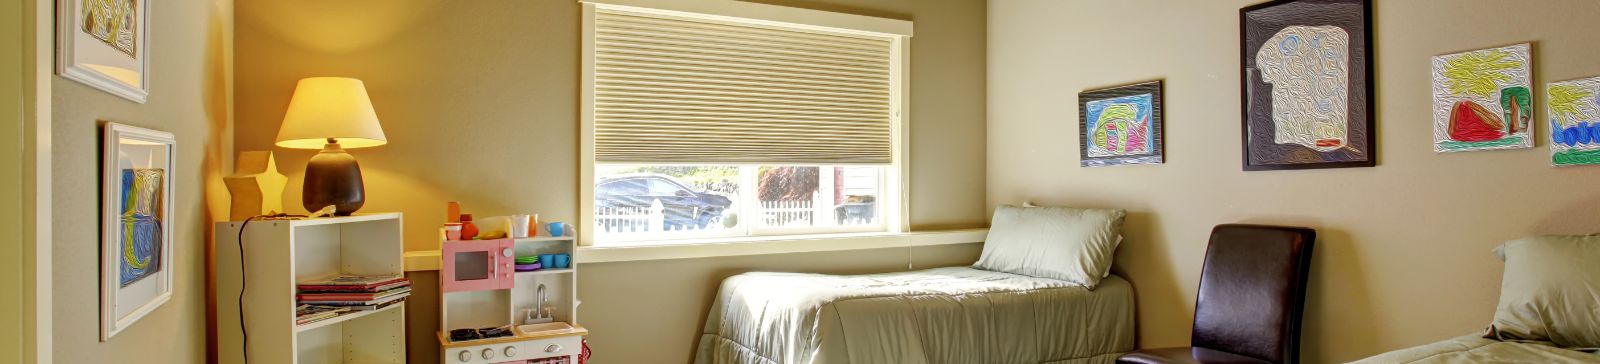 Motorized Blinds &amp; Shades in South Gate